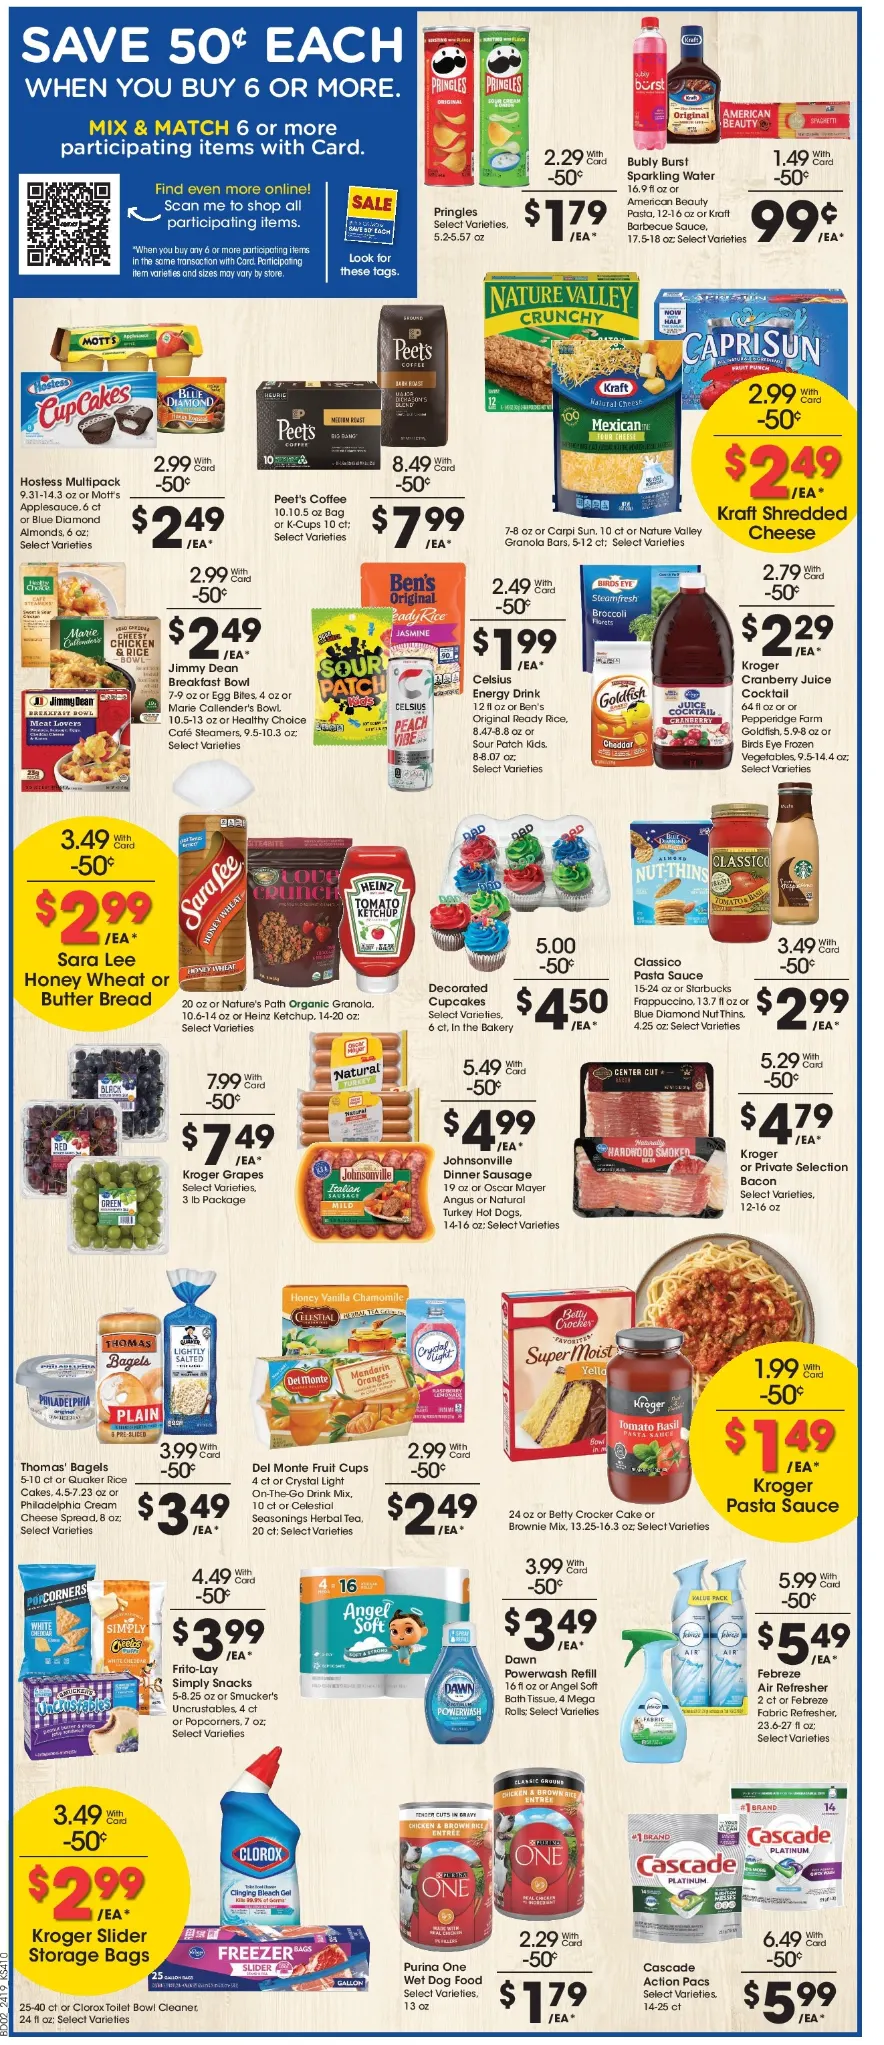 City Market Weekly Ad July 2024 Weekly Sales, Deals, Discounts and Digital Coupons.